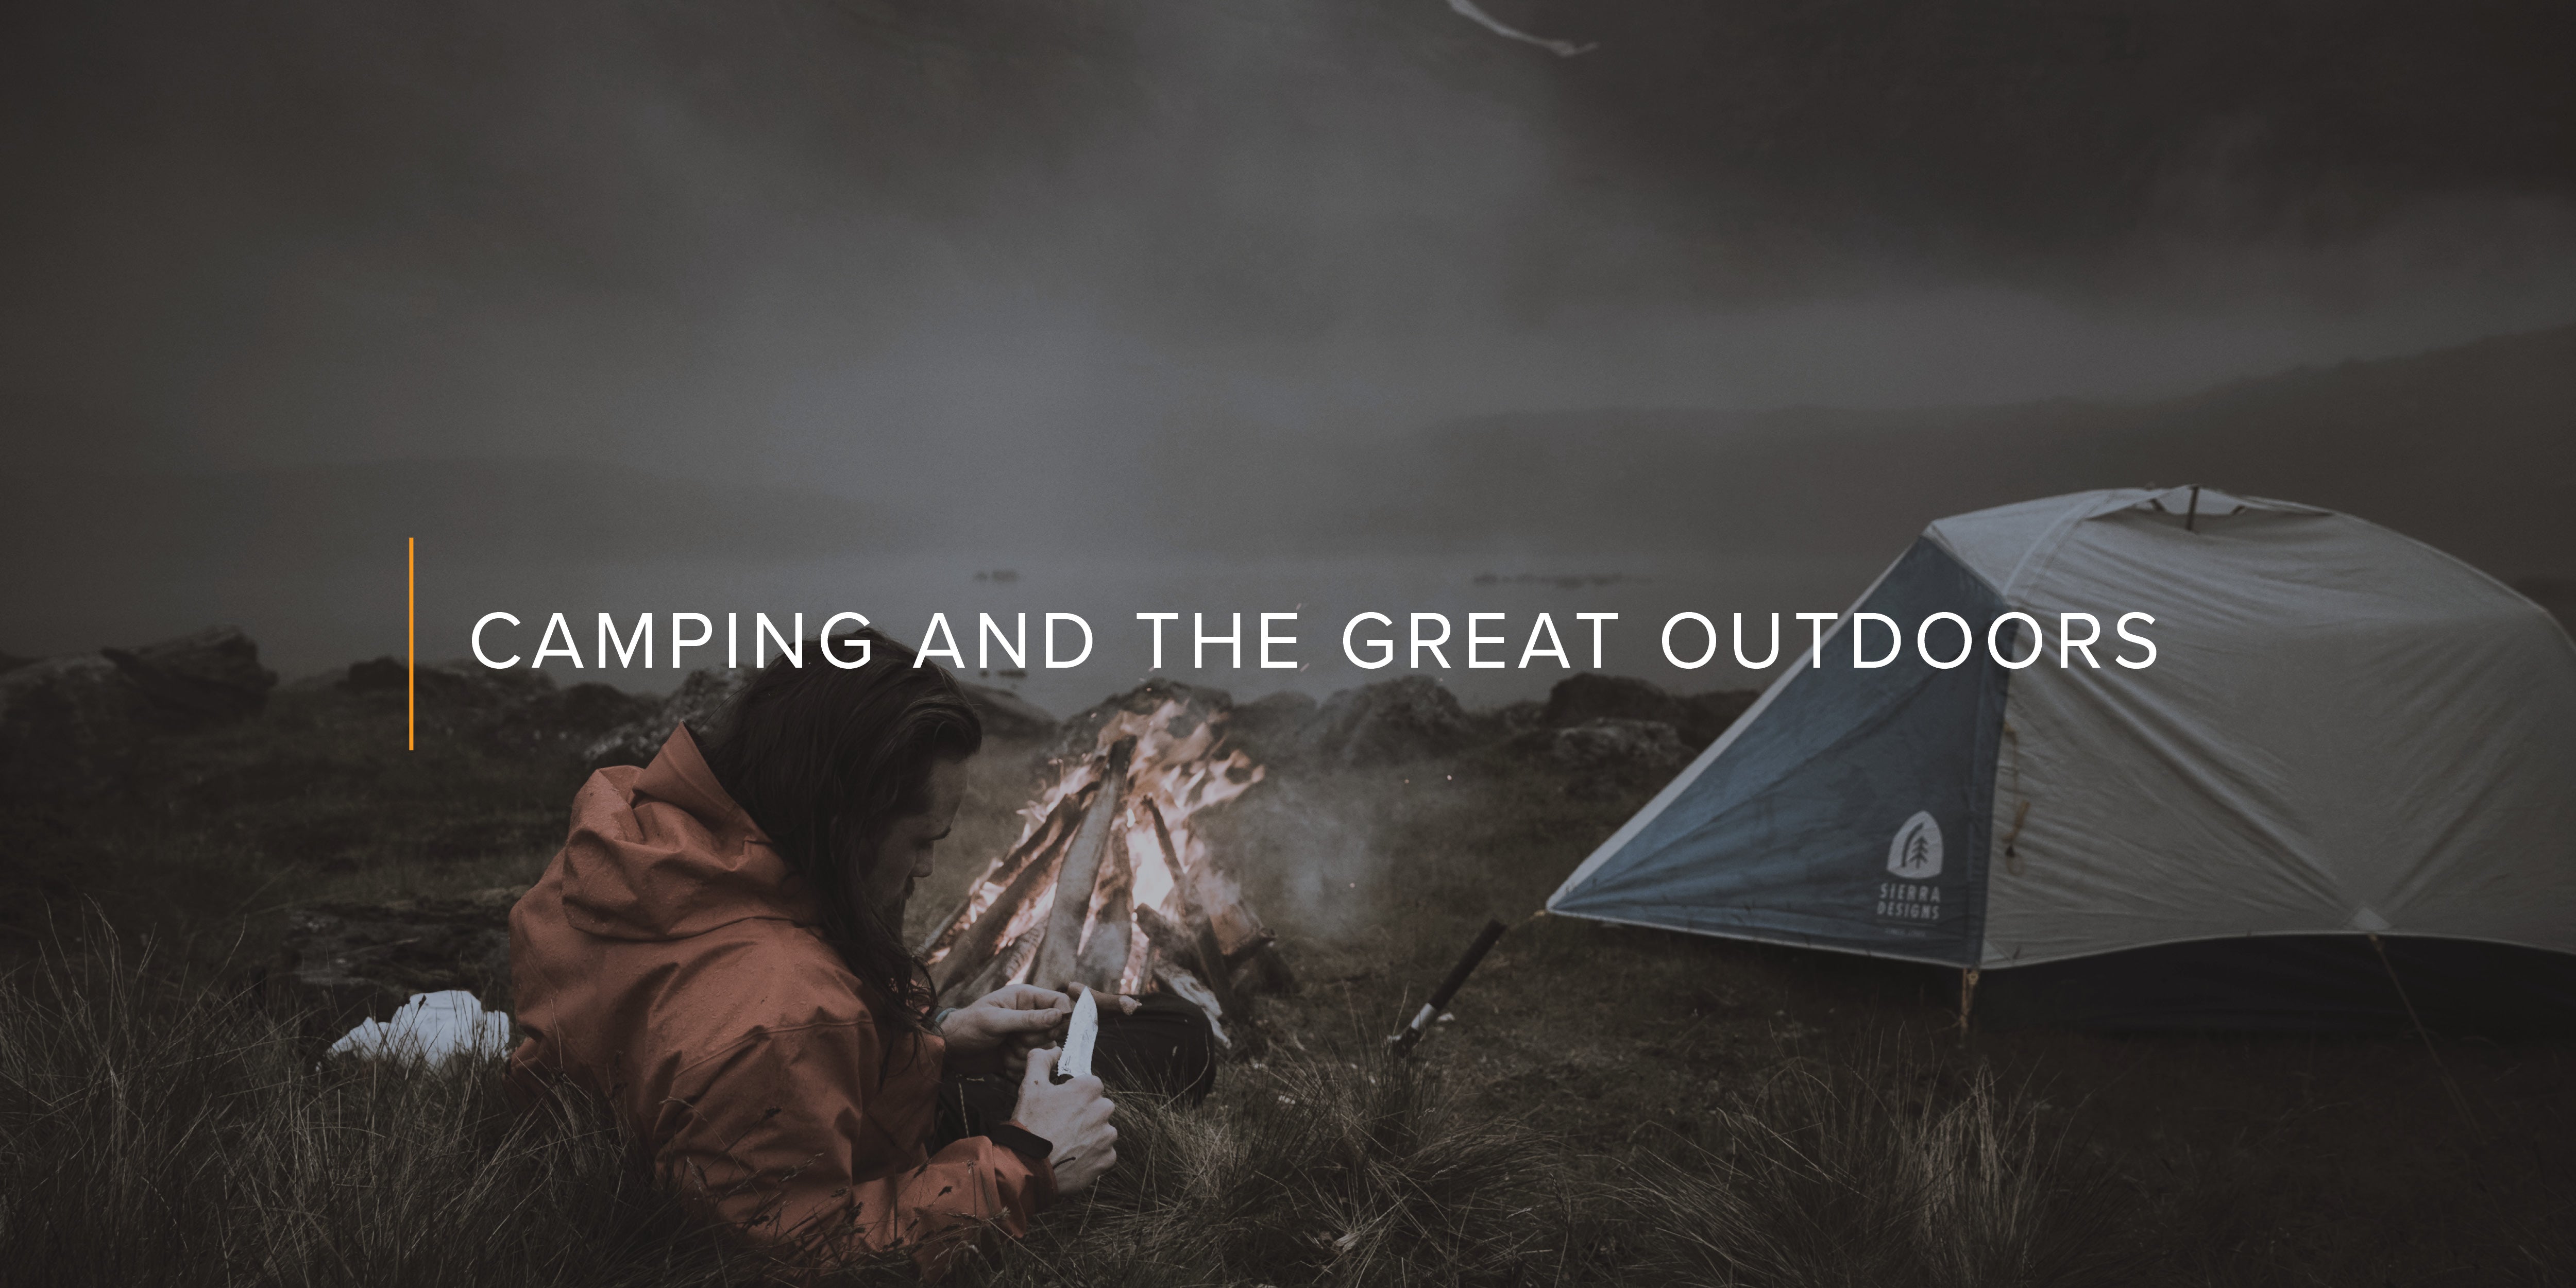 Camping and the Great Outdoors